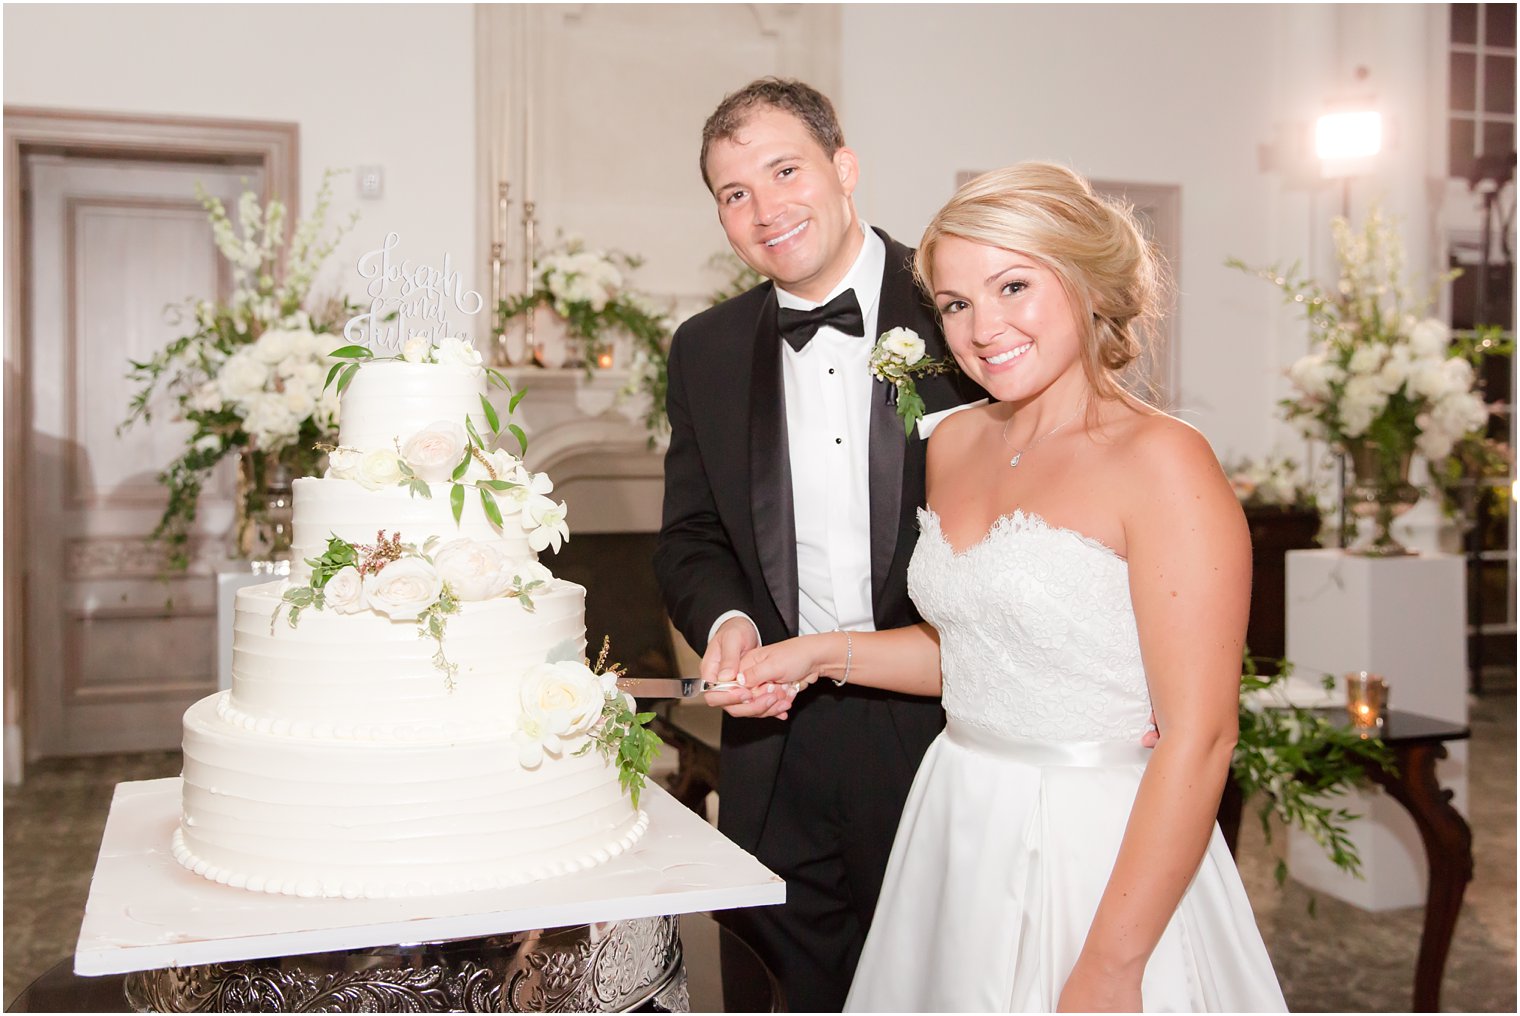 Bride and groom cutting reception cake at Park Chateau